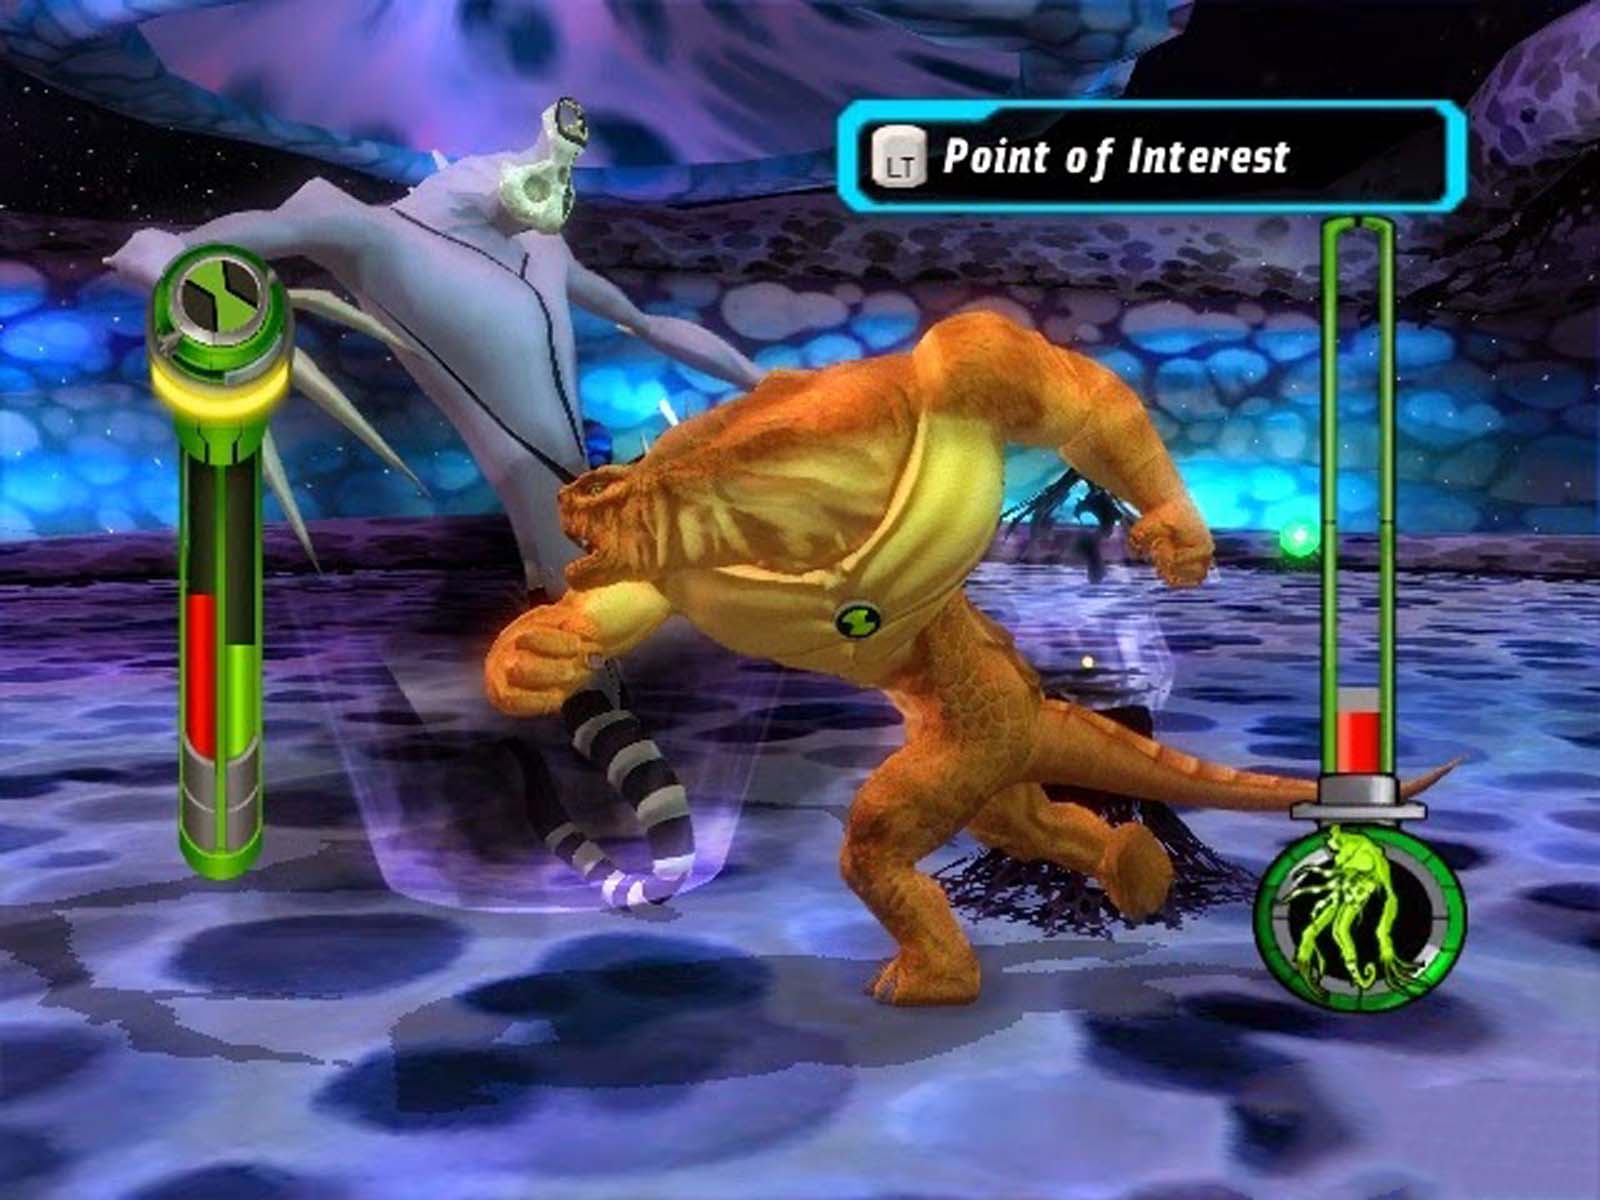 Download ben 10 omniverse 1 for Wii rom